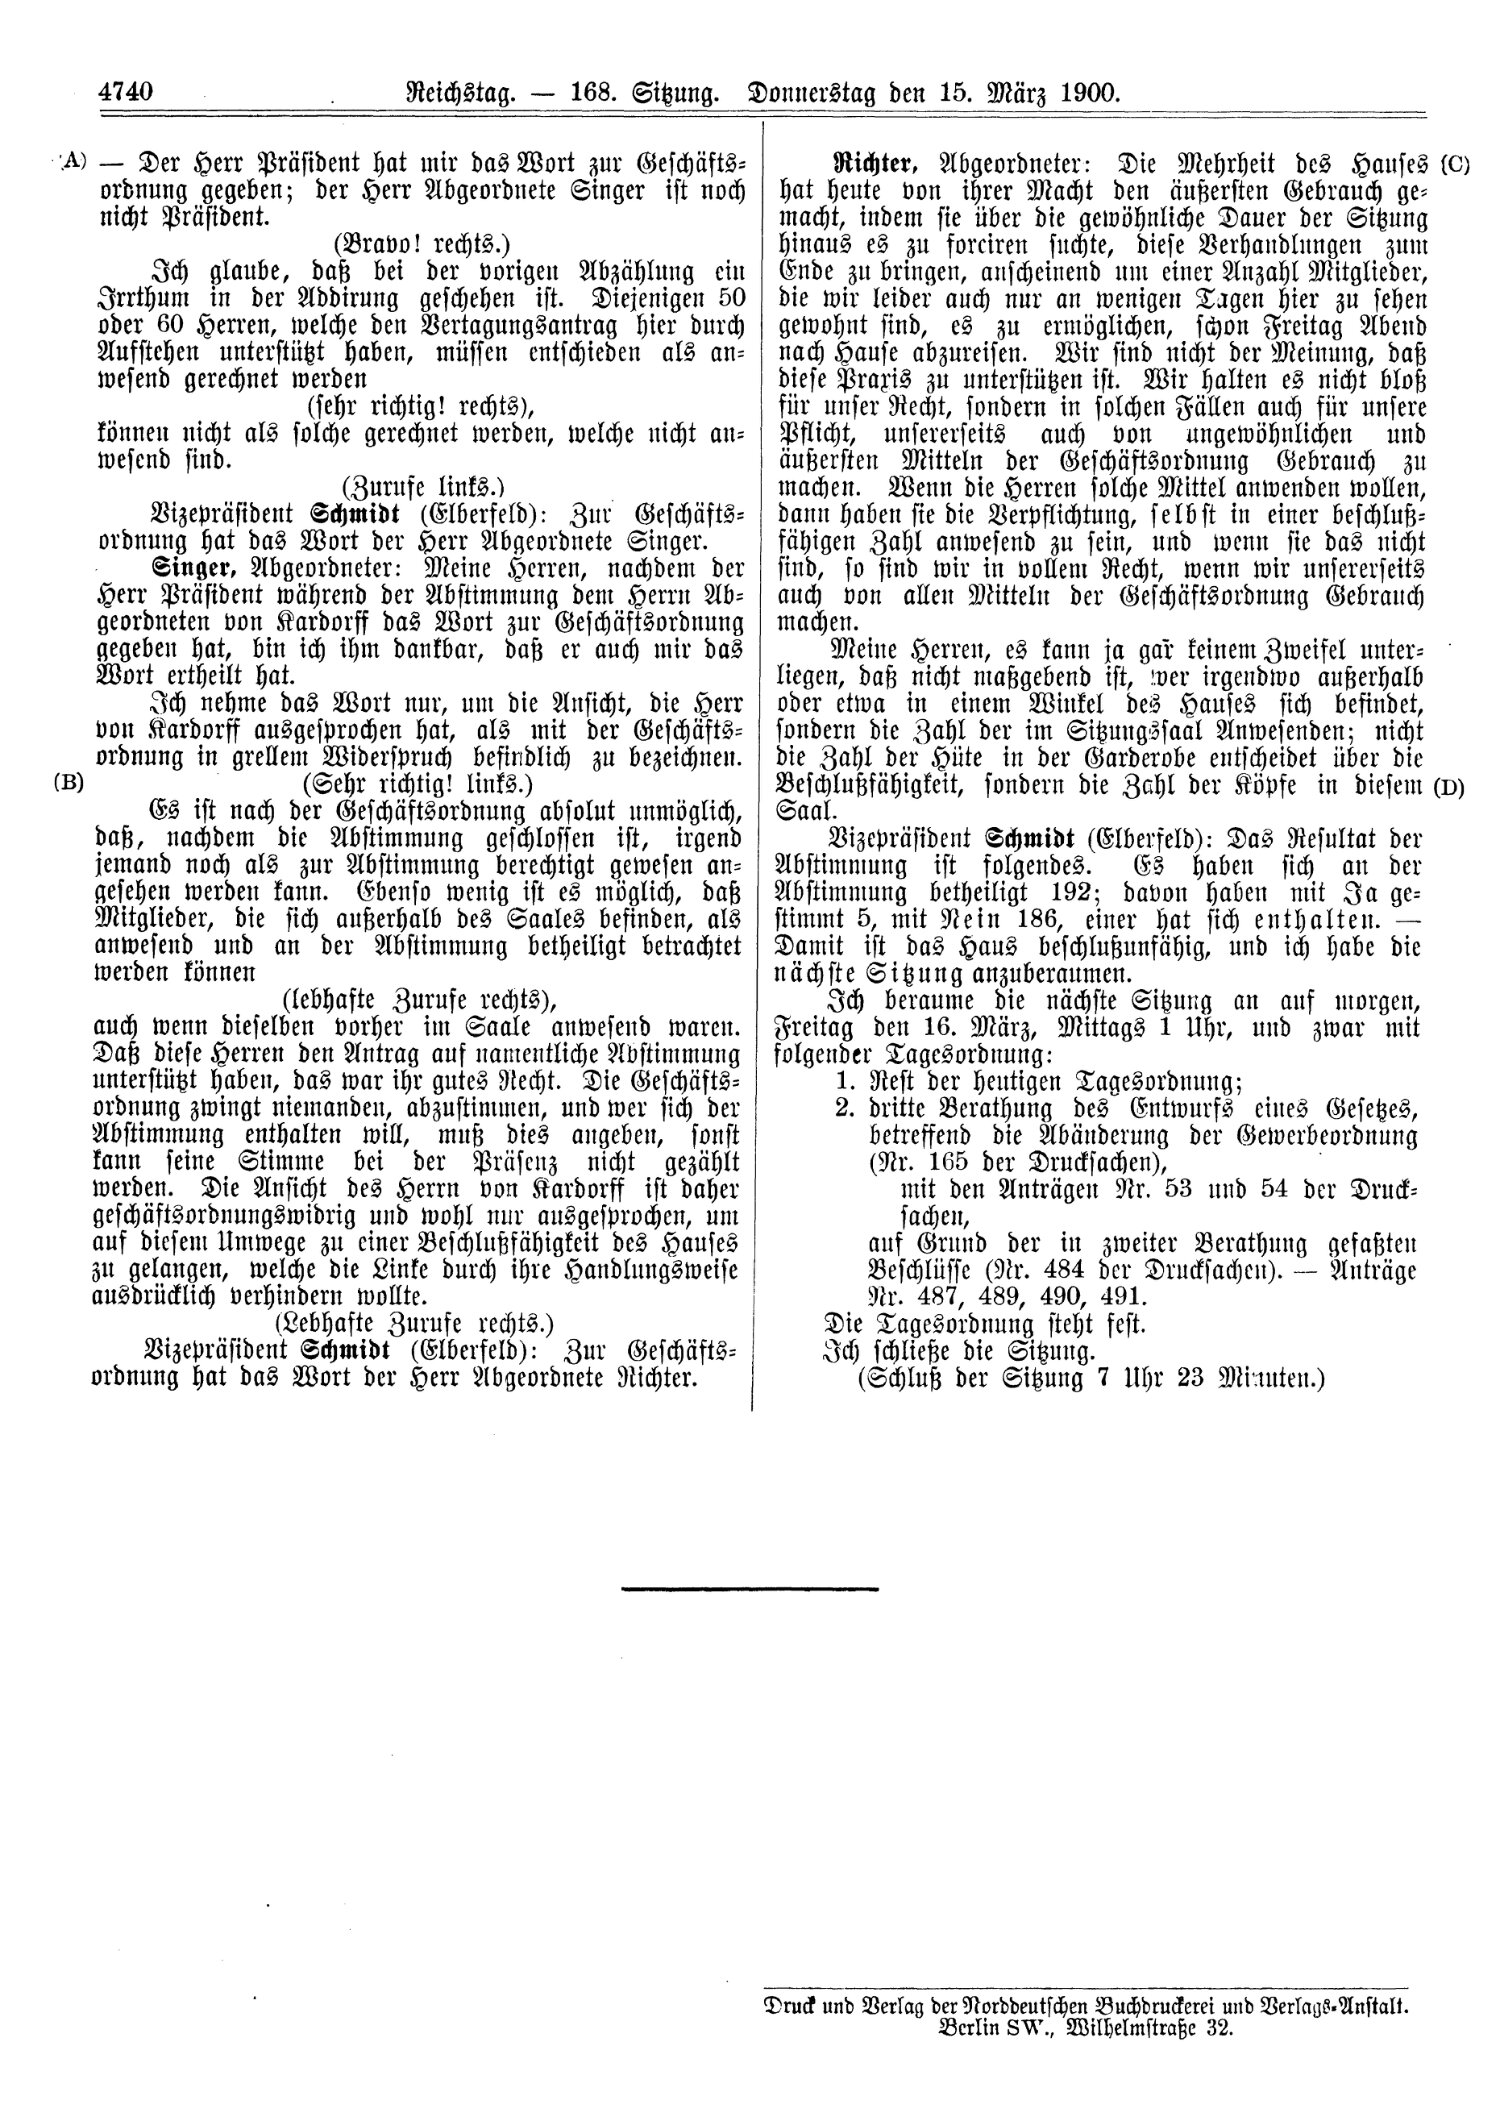 Scan of page 4740